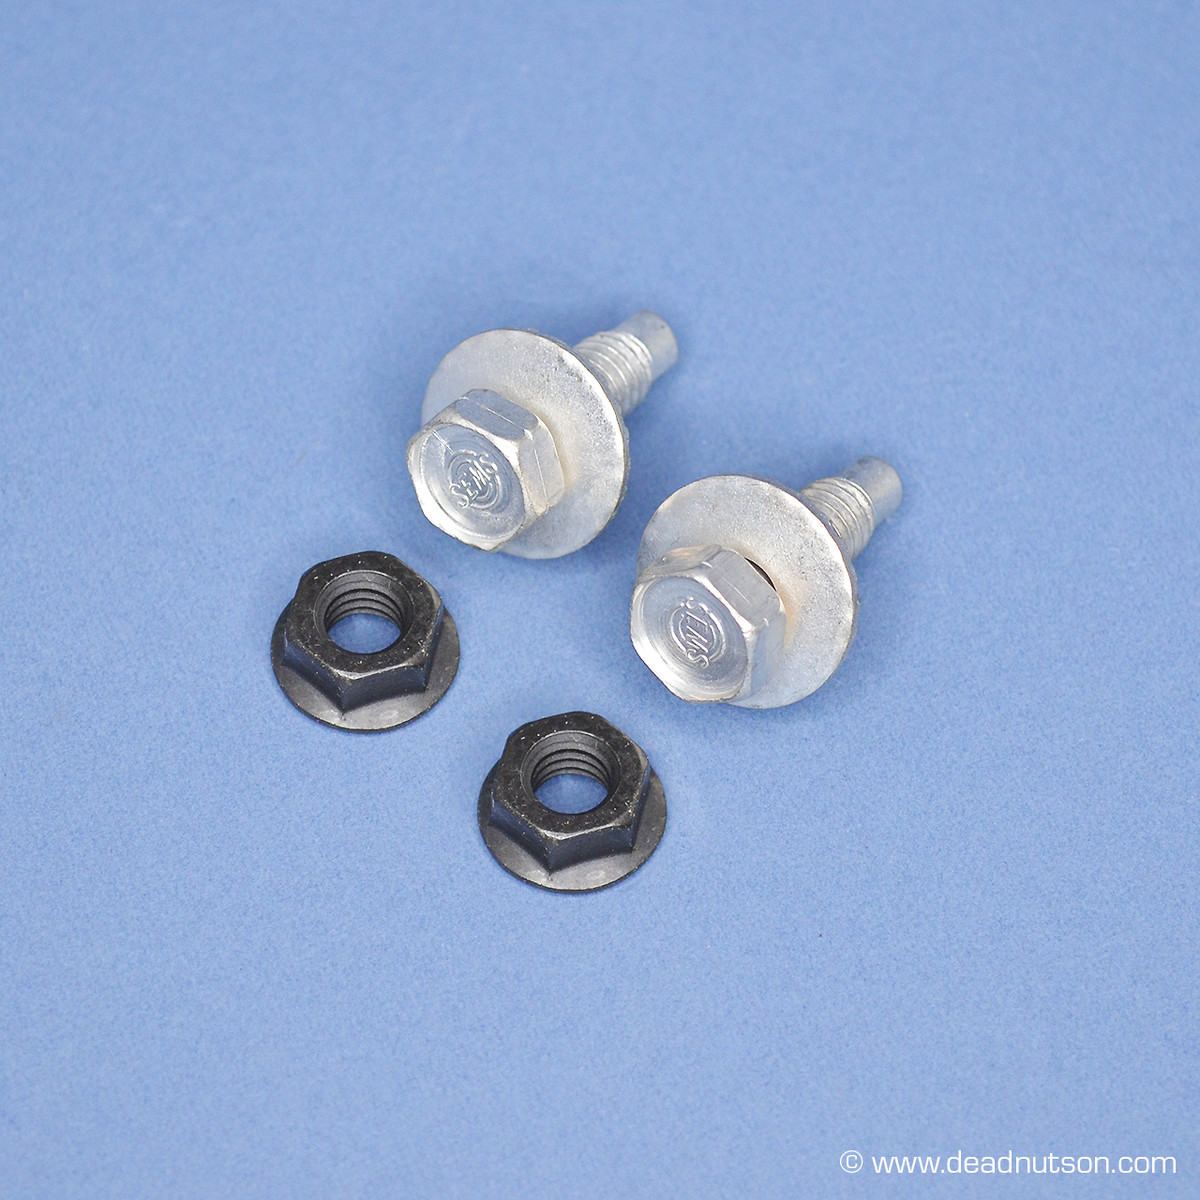 1969-70 Mustang Horn Mounting Bolts - Dead Nuts On